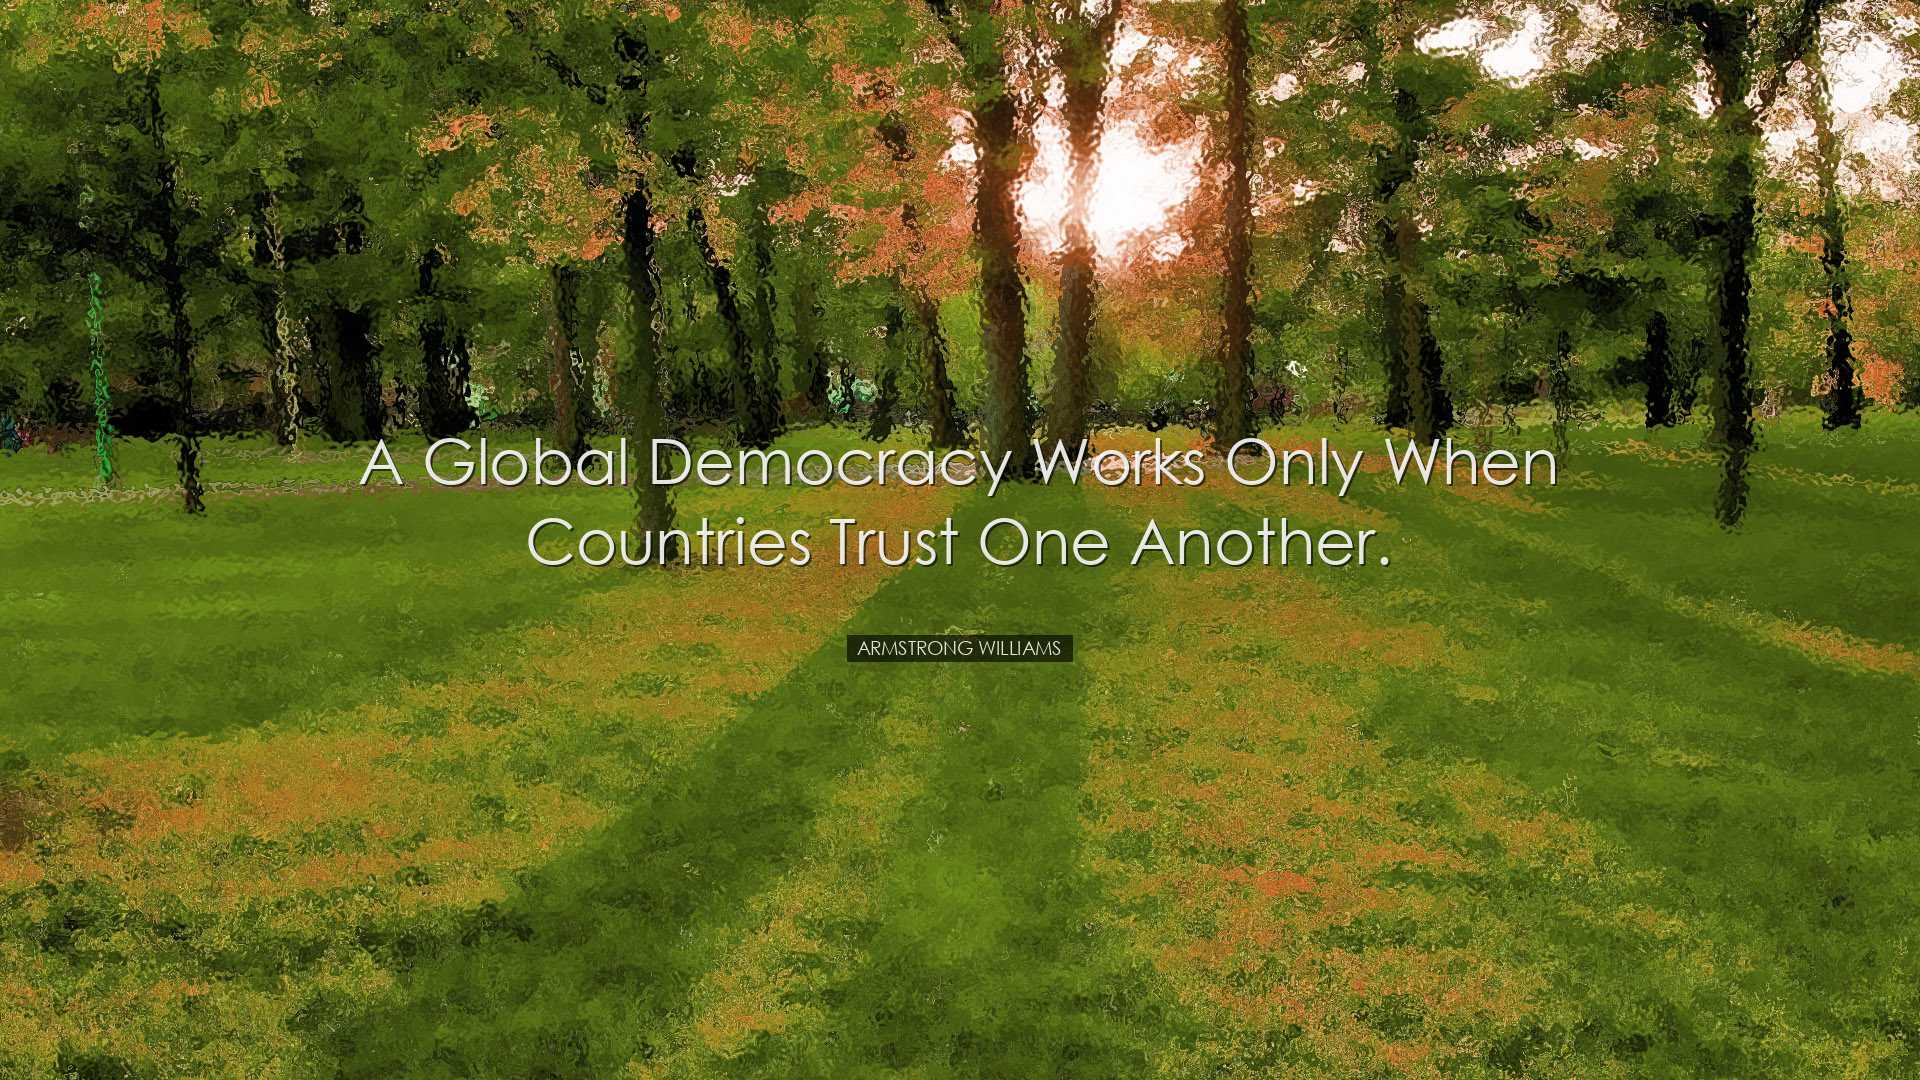 A global democracy works only when countries trust one another. -